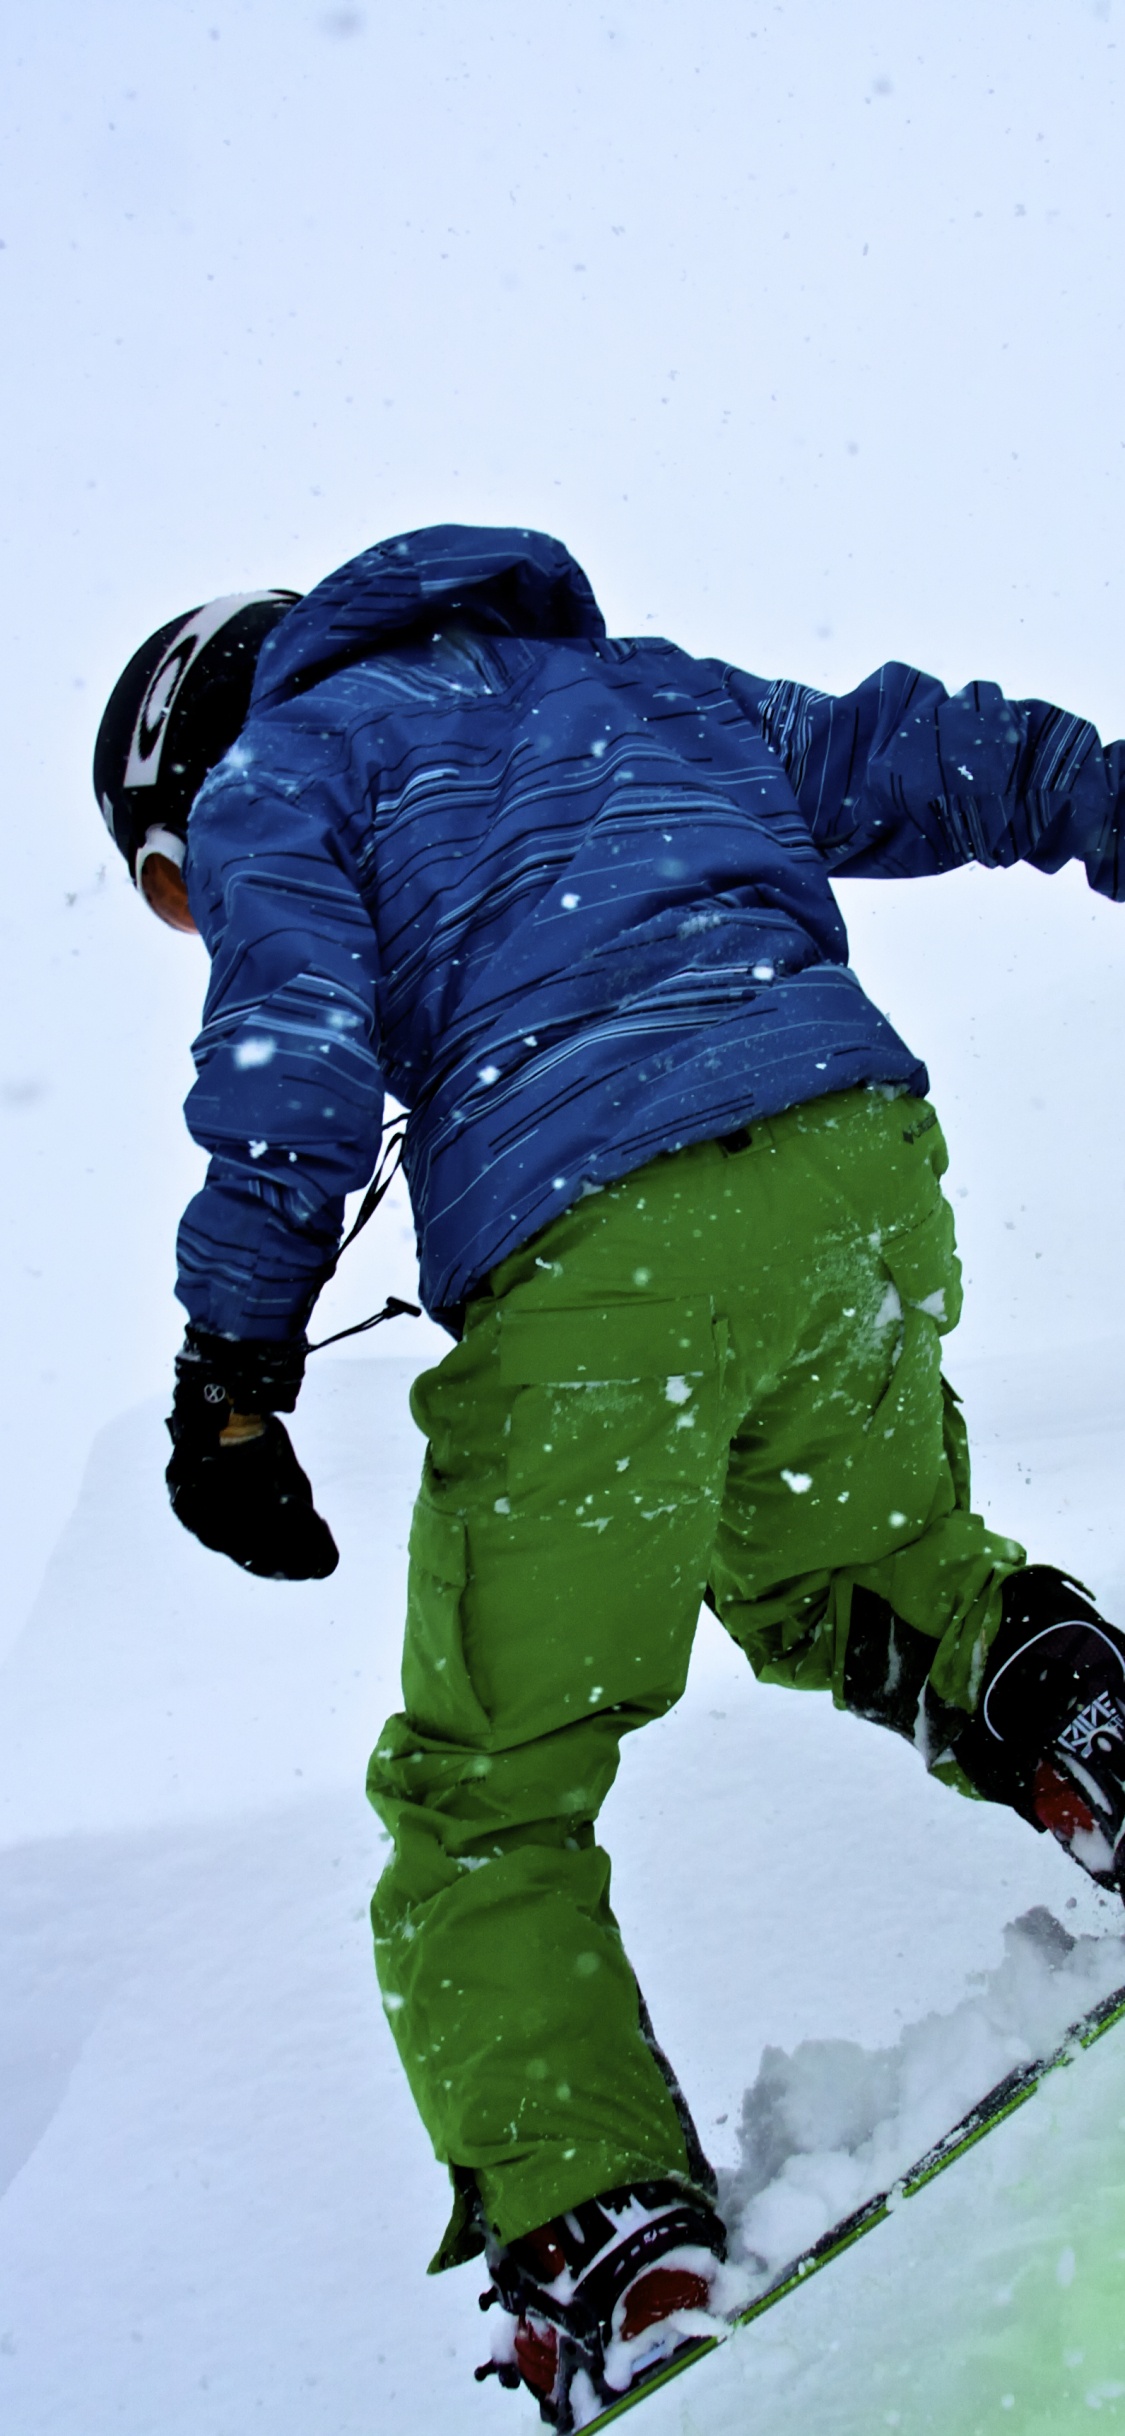 Person in Blue Jacket and Green Pants Riding on Ski Blades on Snow Covered Ground During. Wallpaper in 1125x2436 Resolution